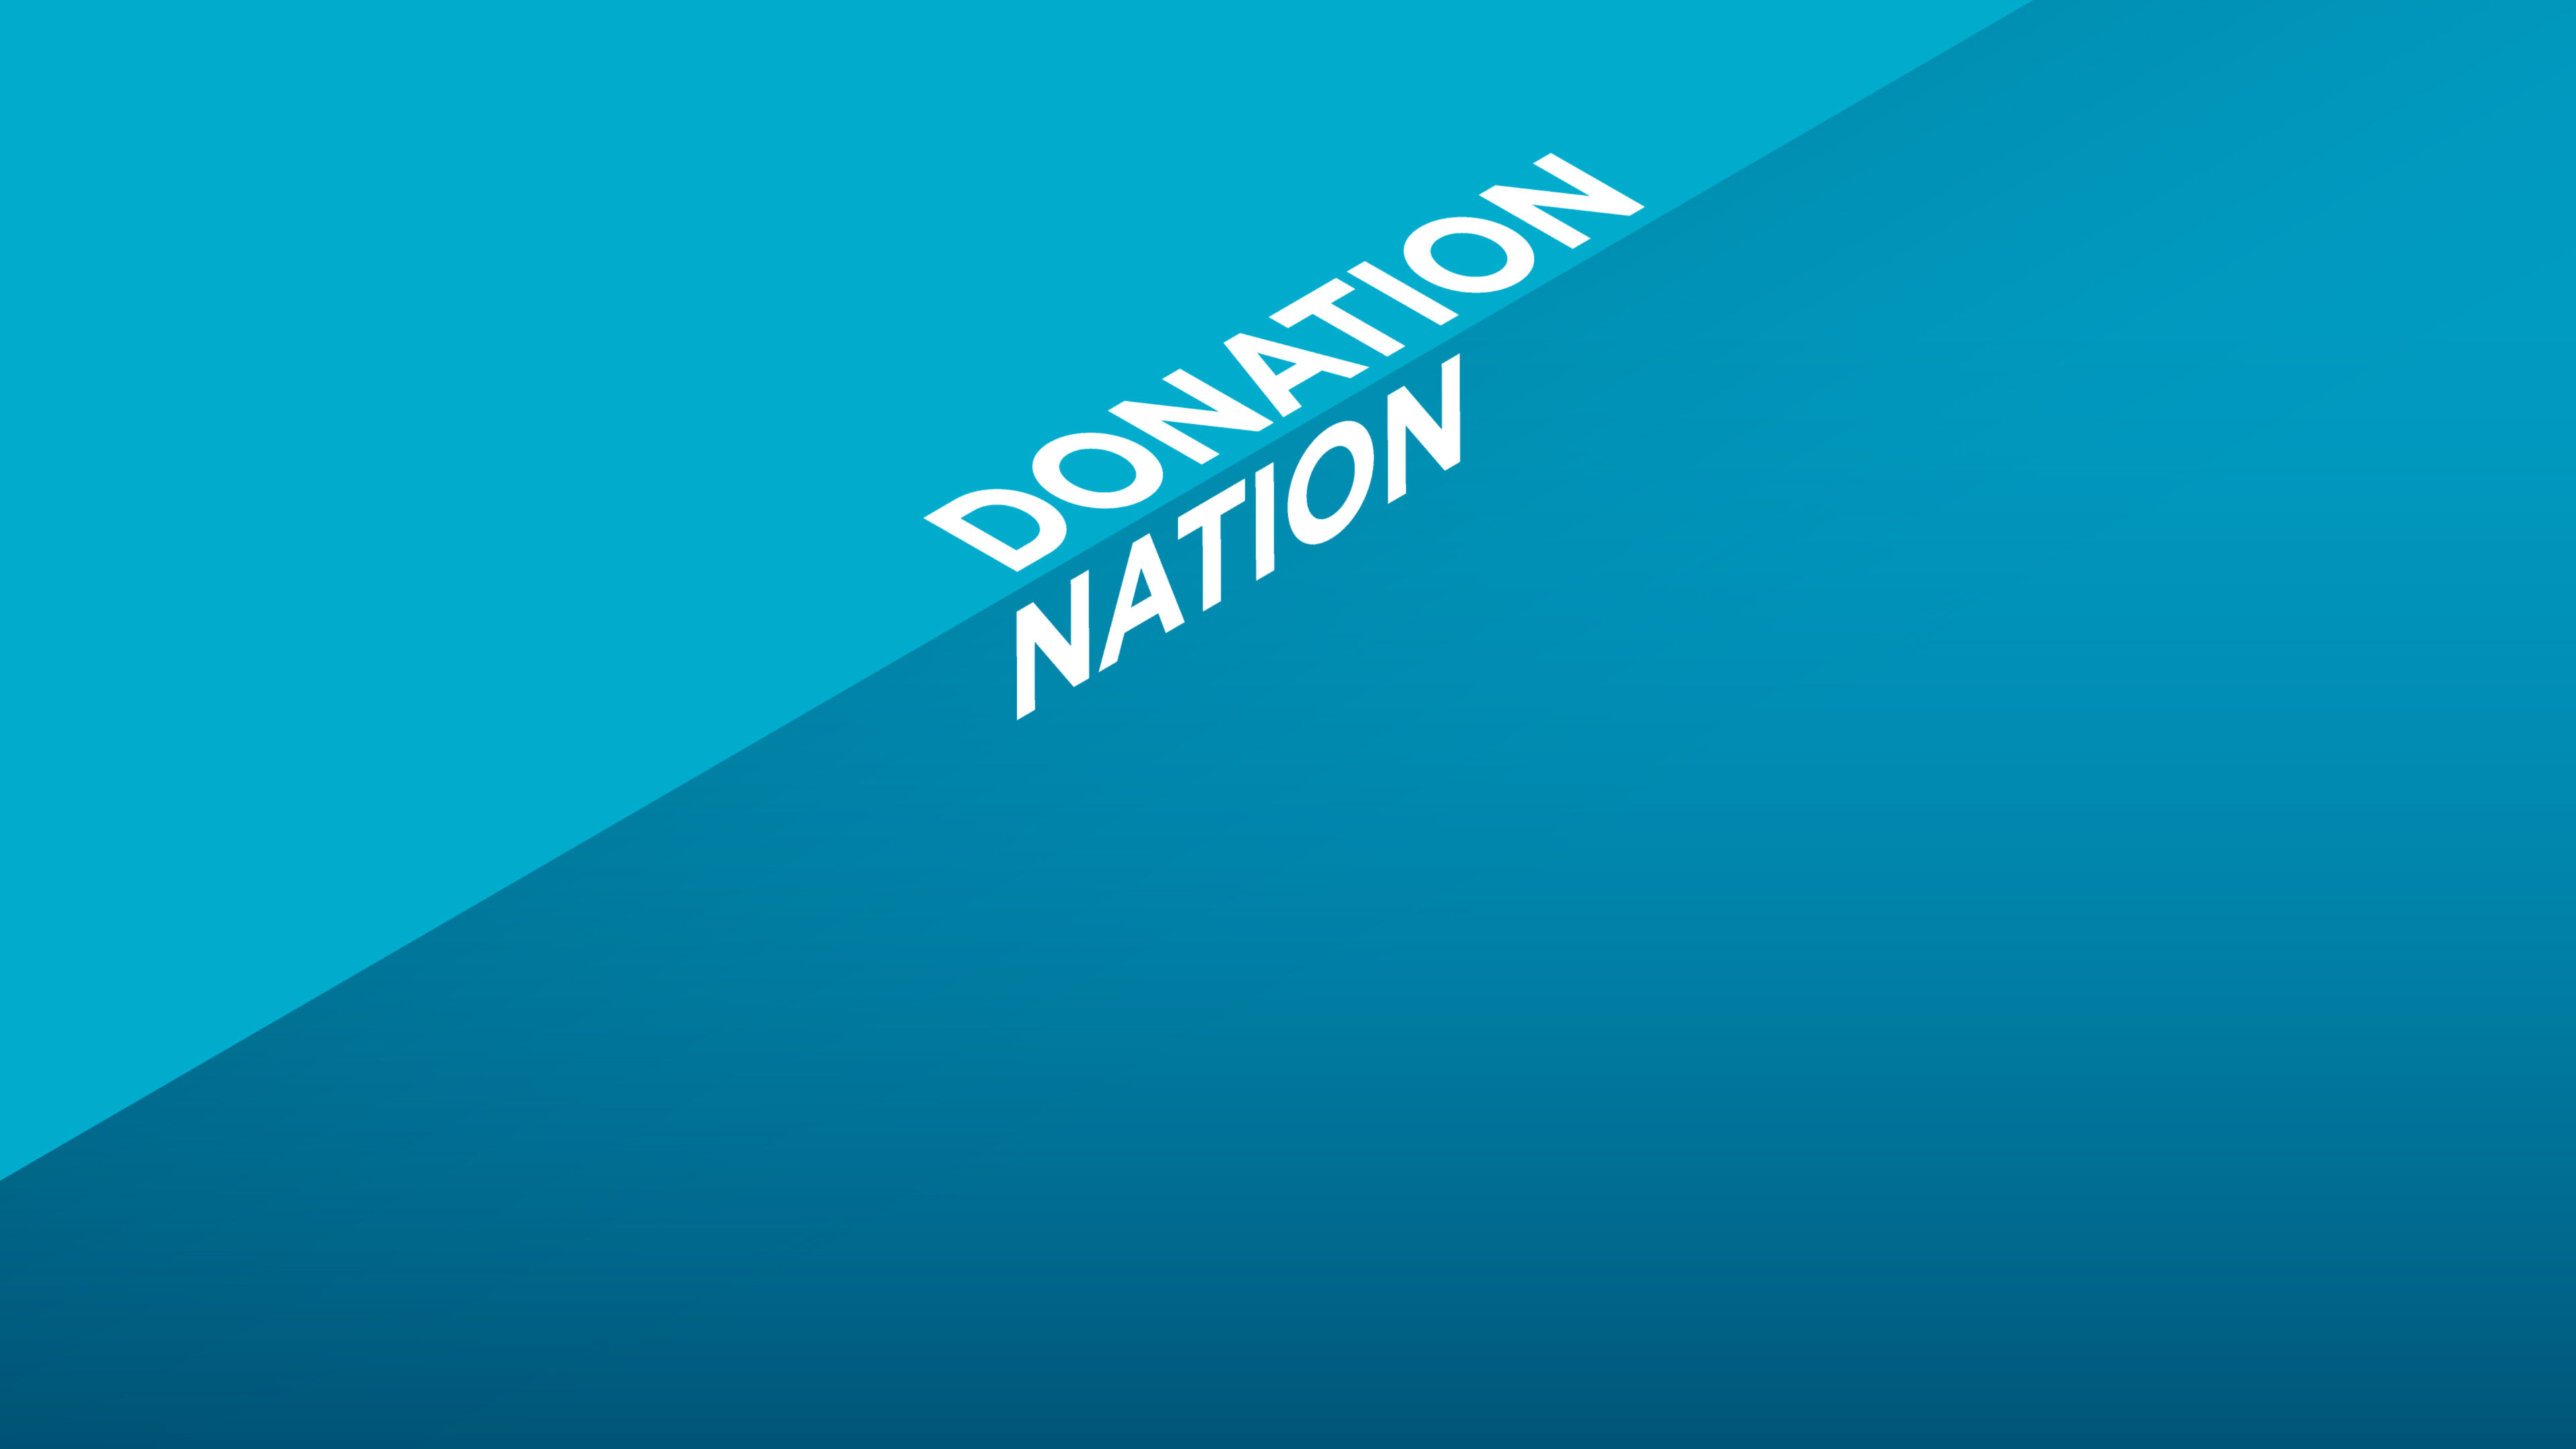 "Donation Nation" is uppercase, riding along a shadow edge and a full-bleed background.